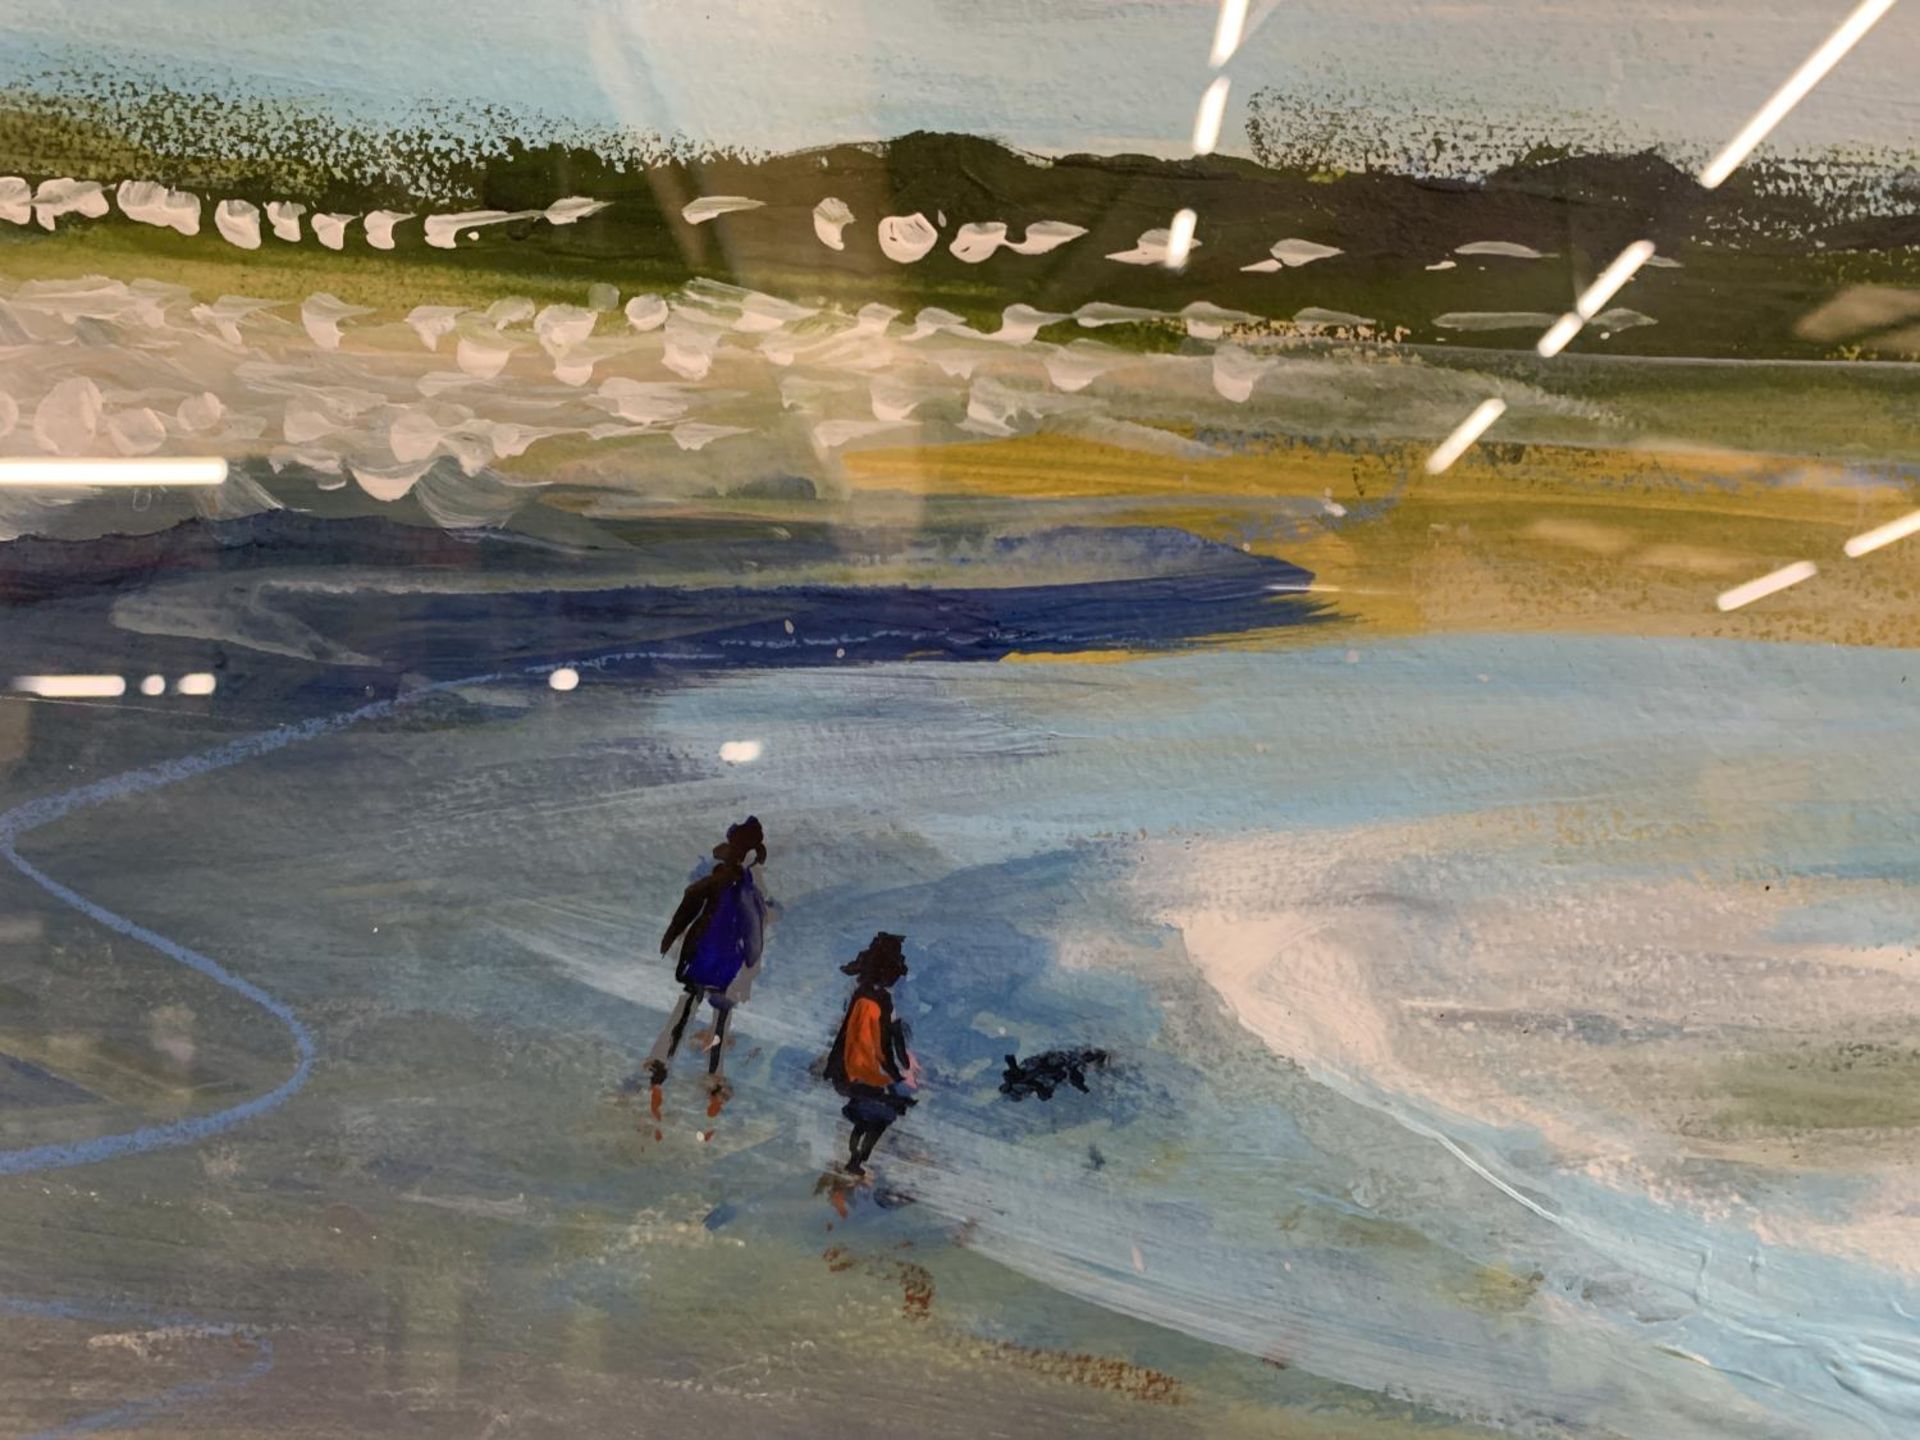 A PENELOPE TIMMIS MIXED MEDIA PAINTING OF A COASTAL SCENCE - Image 3 of 5